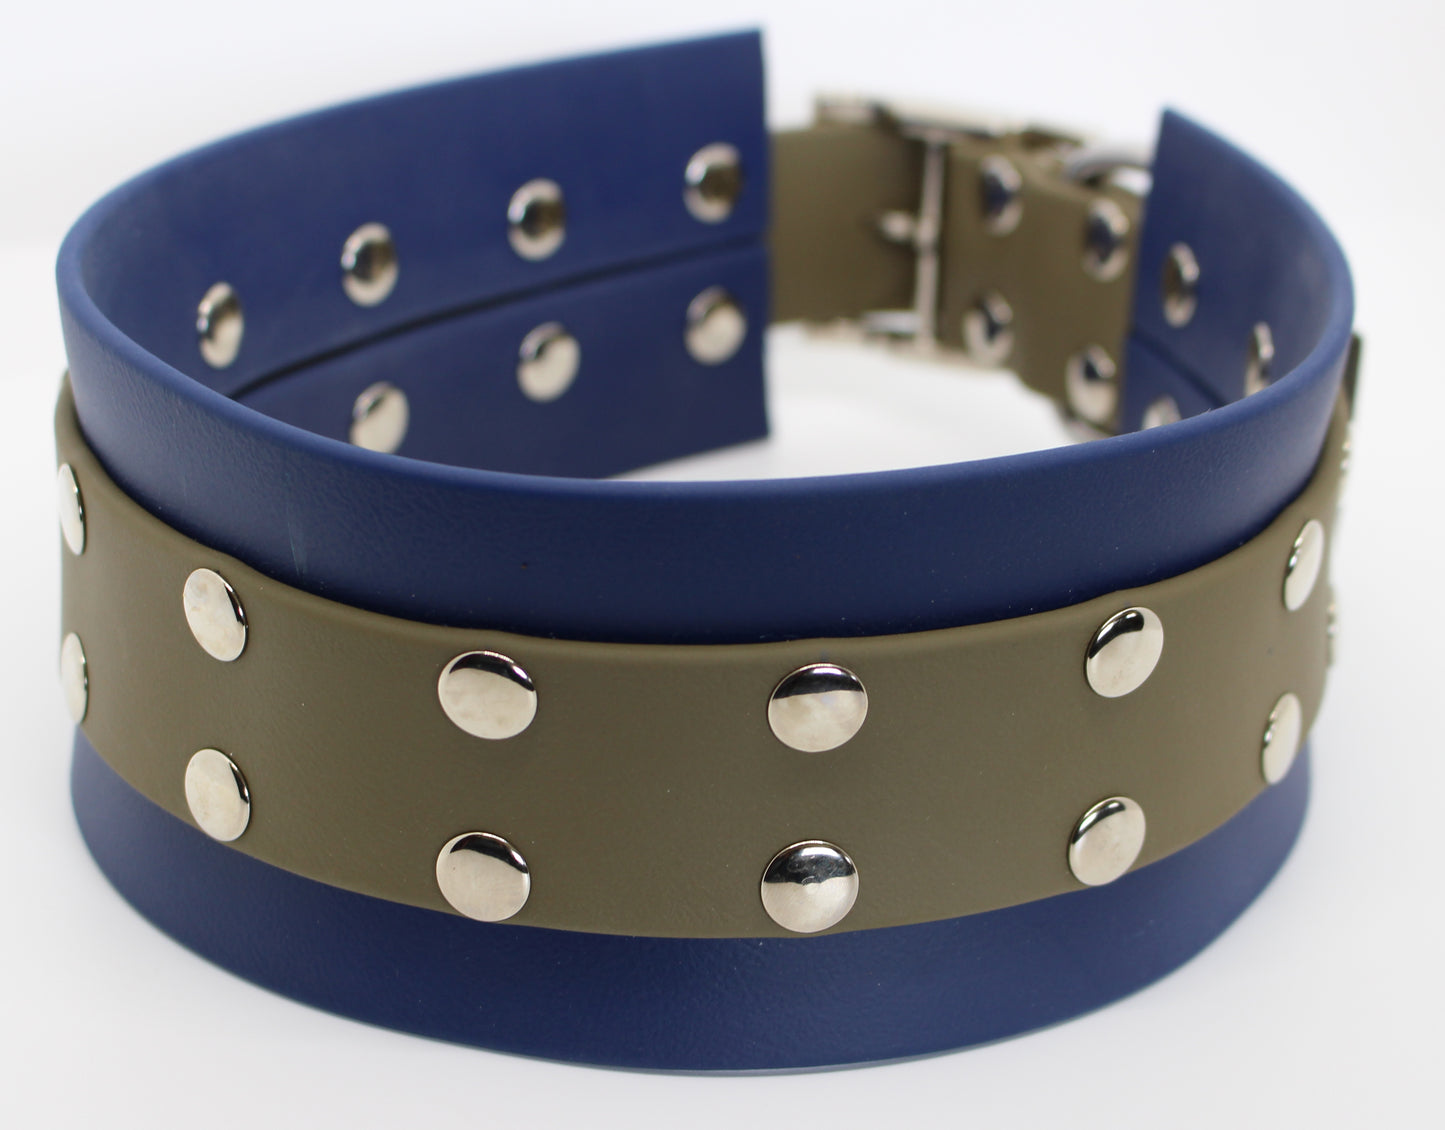 Collar - Large Breed 3" Wide